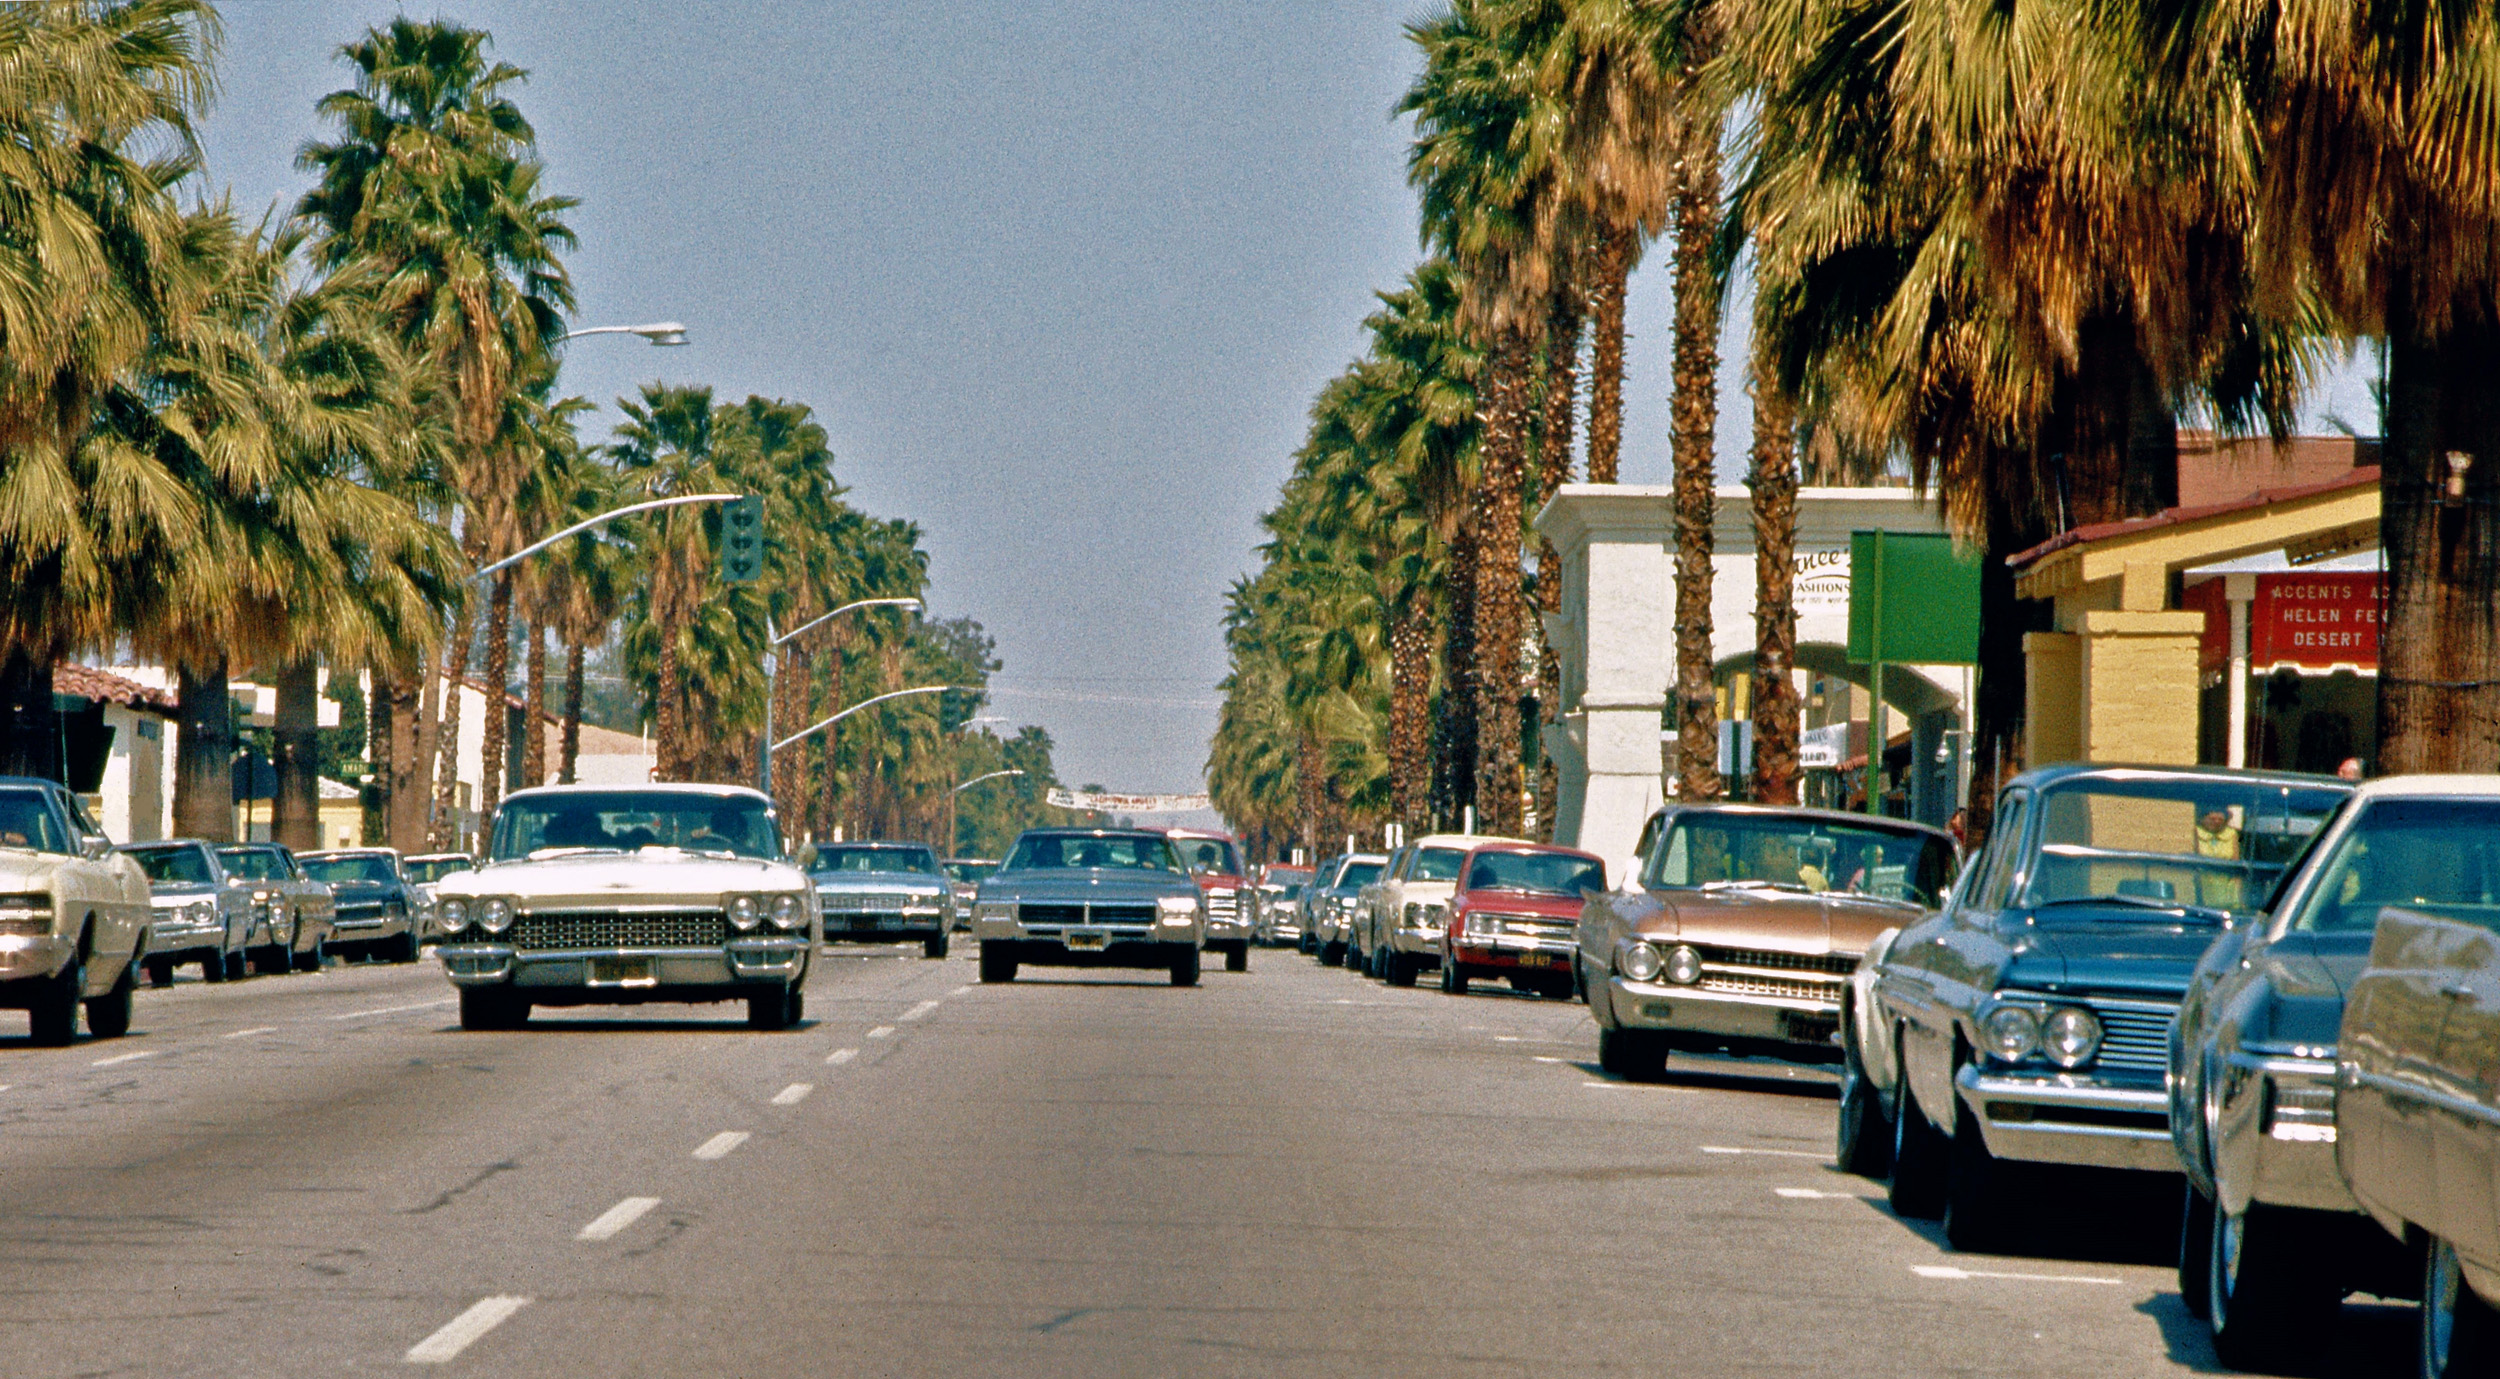 Los Angeles Palm Springs from my first trip to Southern California in March 1969 as a teenager. I took this squatting in the street for visual effect with a Pentax 35mm SLR. Lots of 1960s (and classic 1950s) iron to enjoy, but darned if I remember what street this is! View full size.